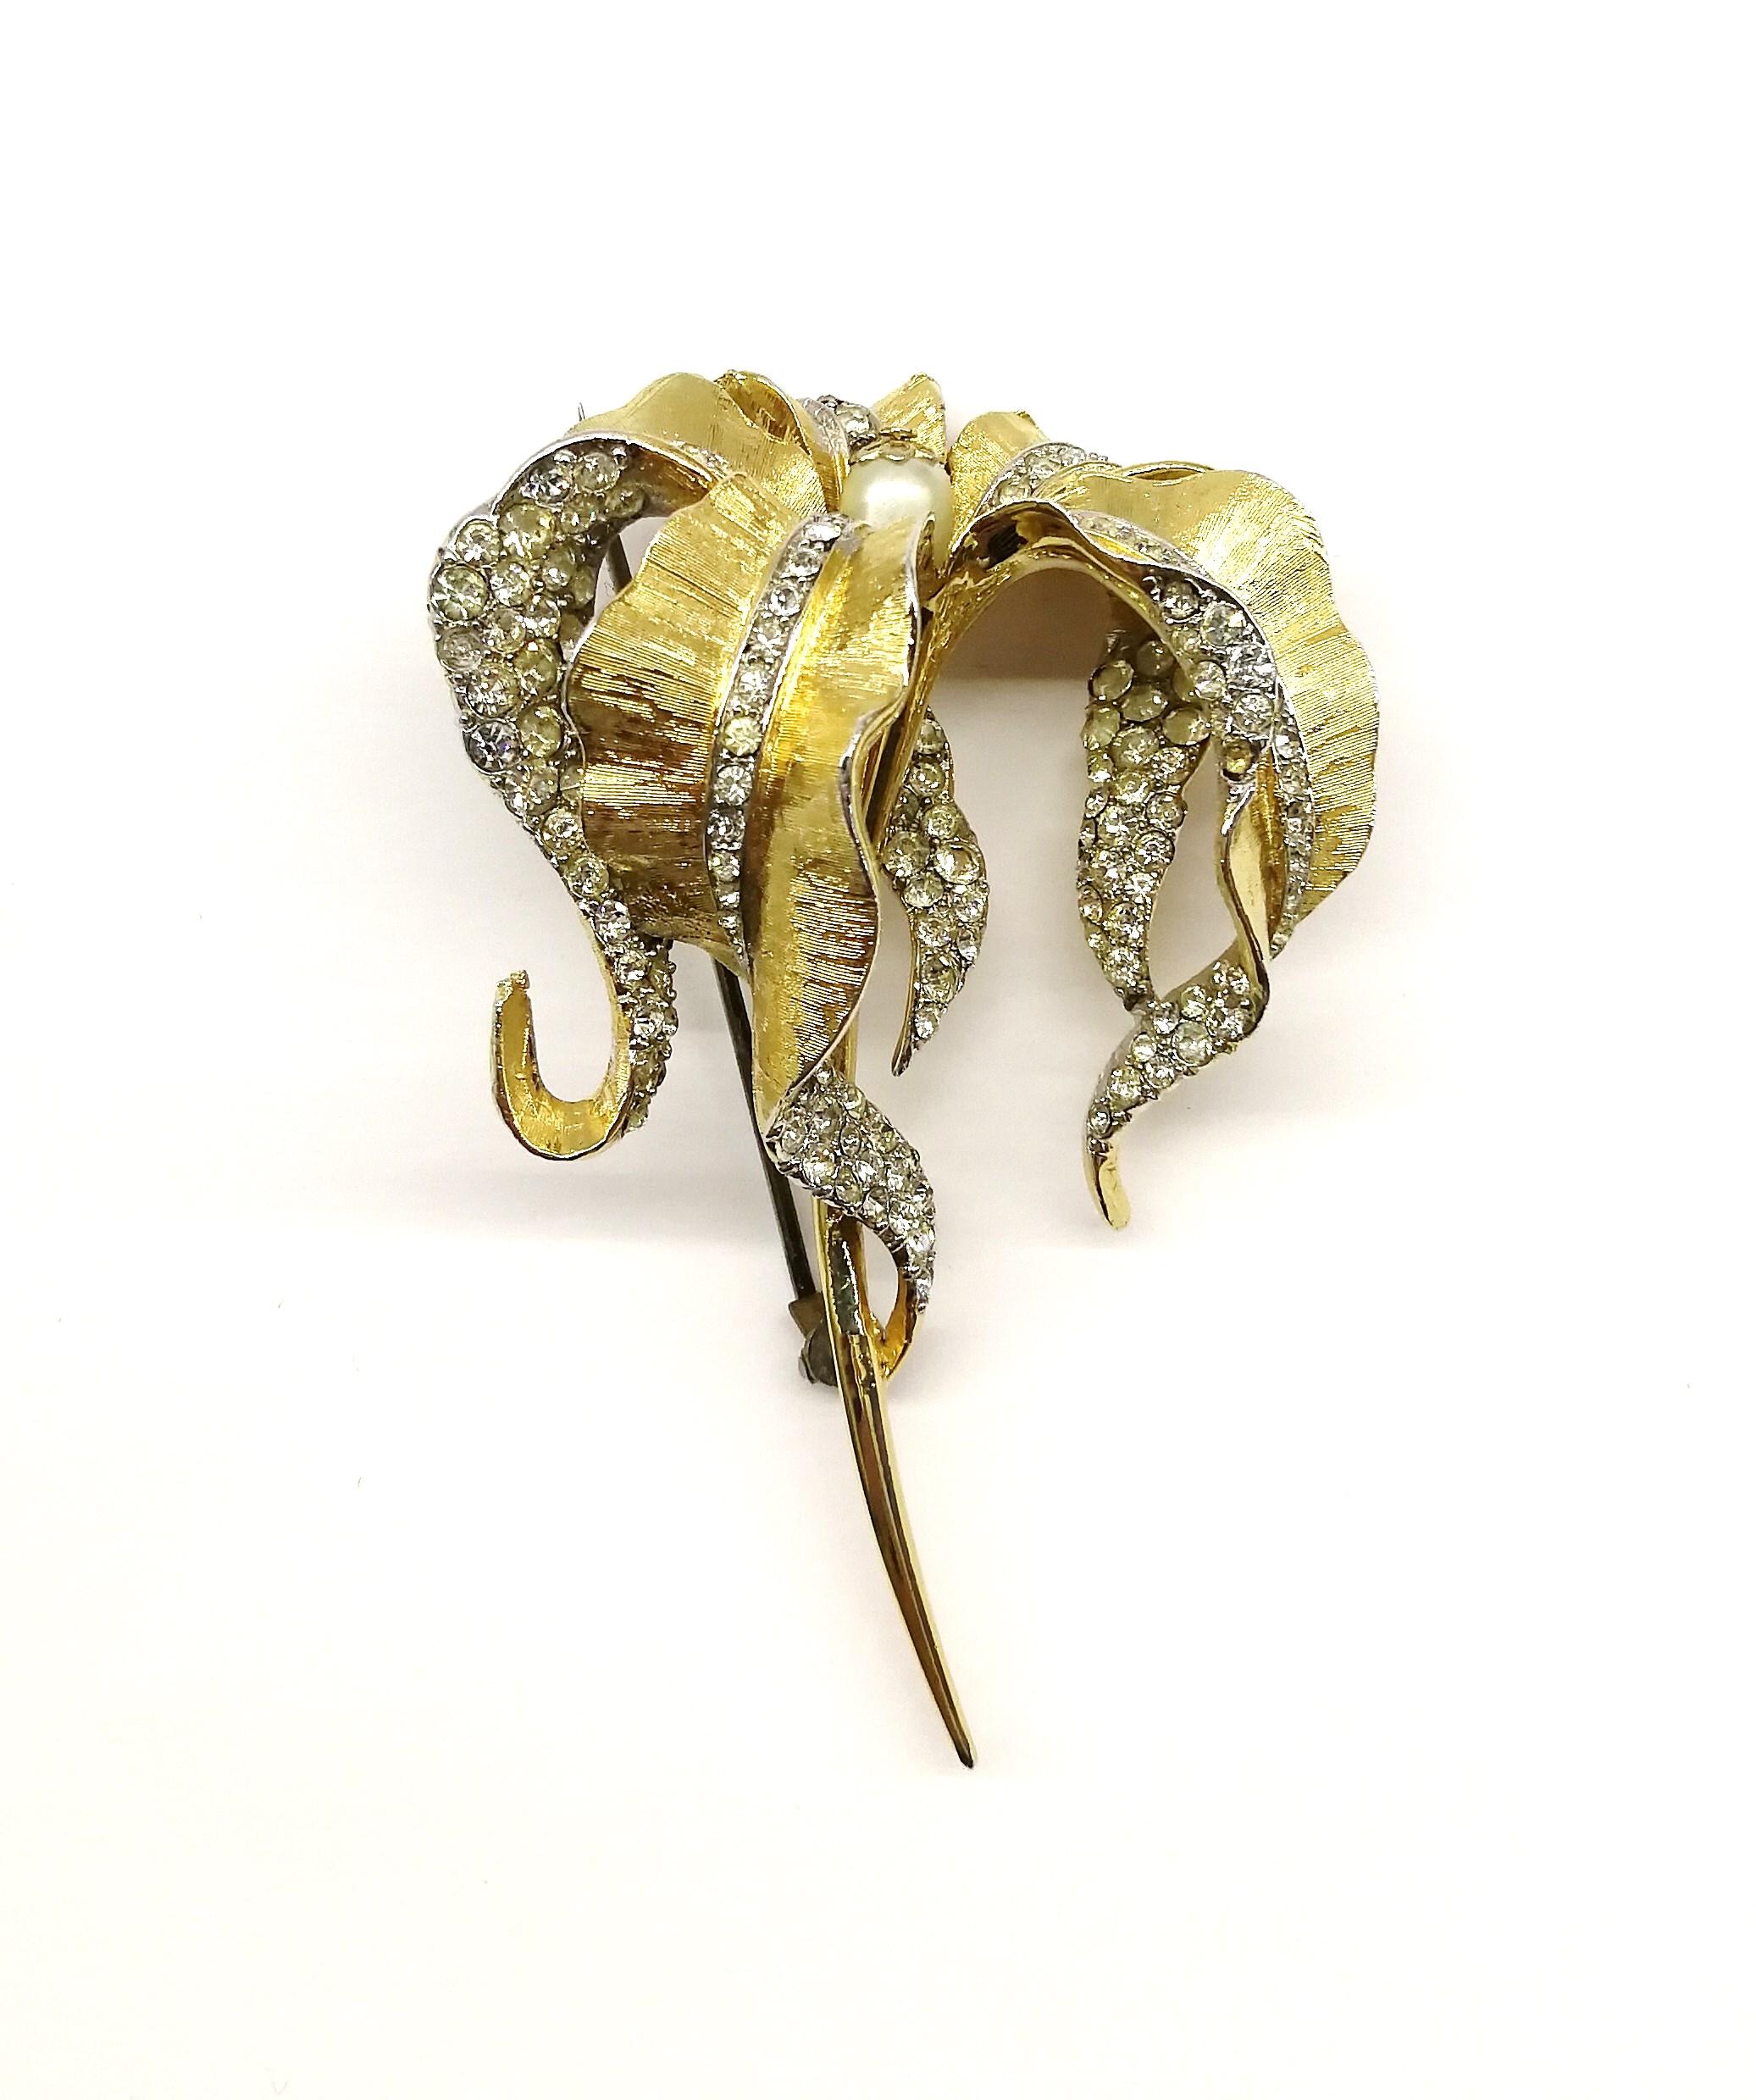 A stylish and striking 'lily' brooch, of the standard and quality as expected from Boucher jewellery, made in the 1960s, in the manner of Van Cleef and Arpels jewellery of the period.
Marcel Boucher manufactured costume jewellery from 1937 through